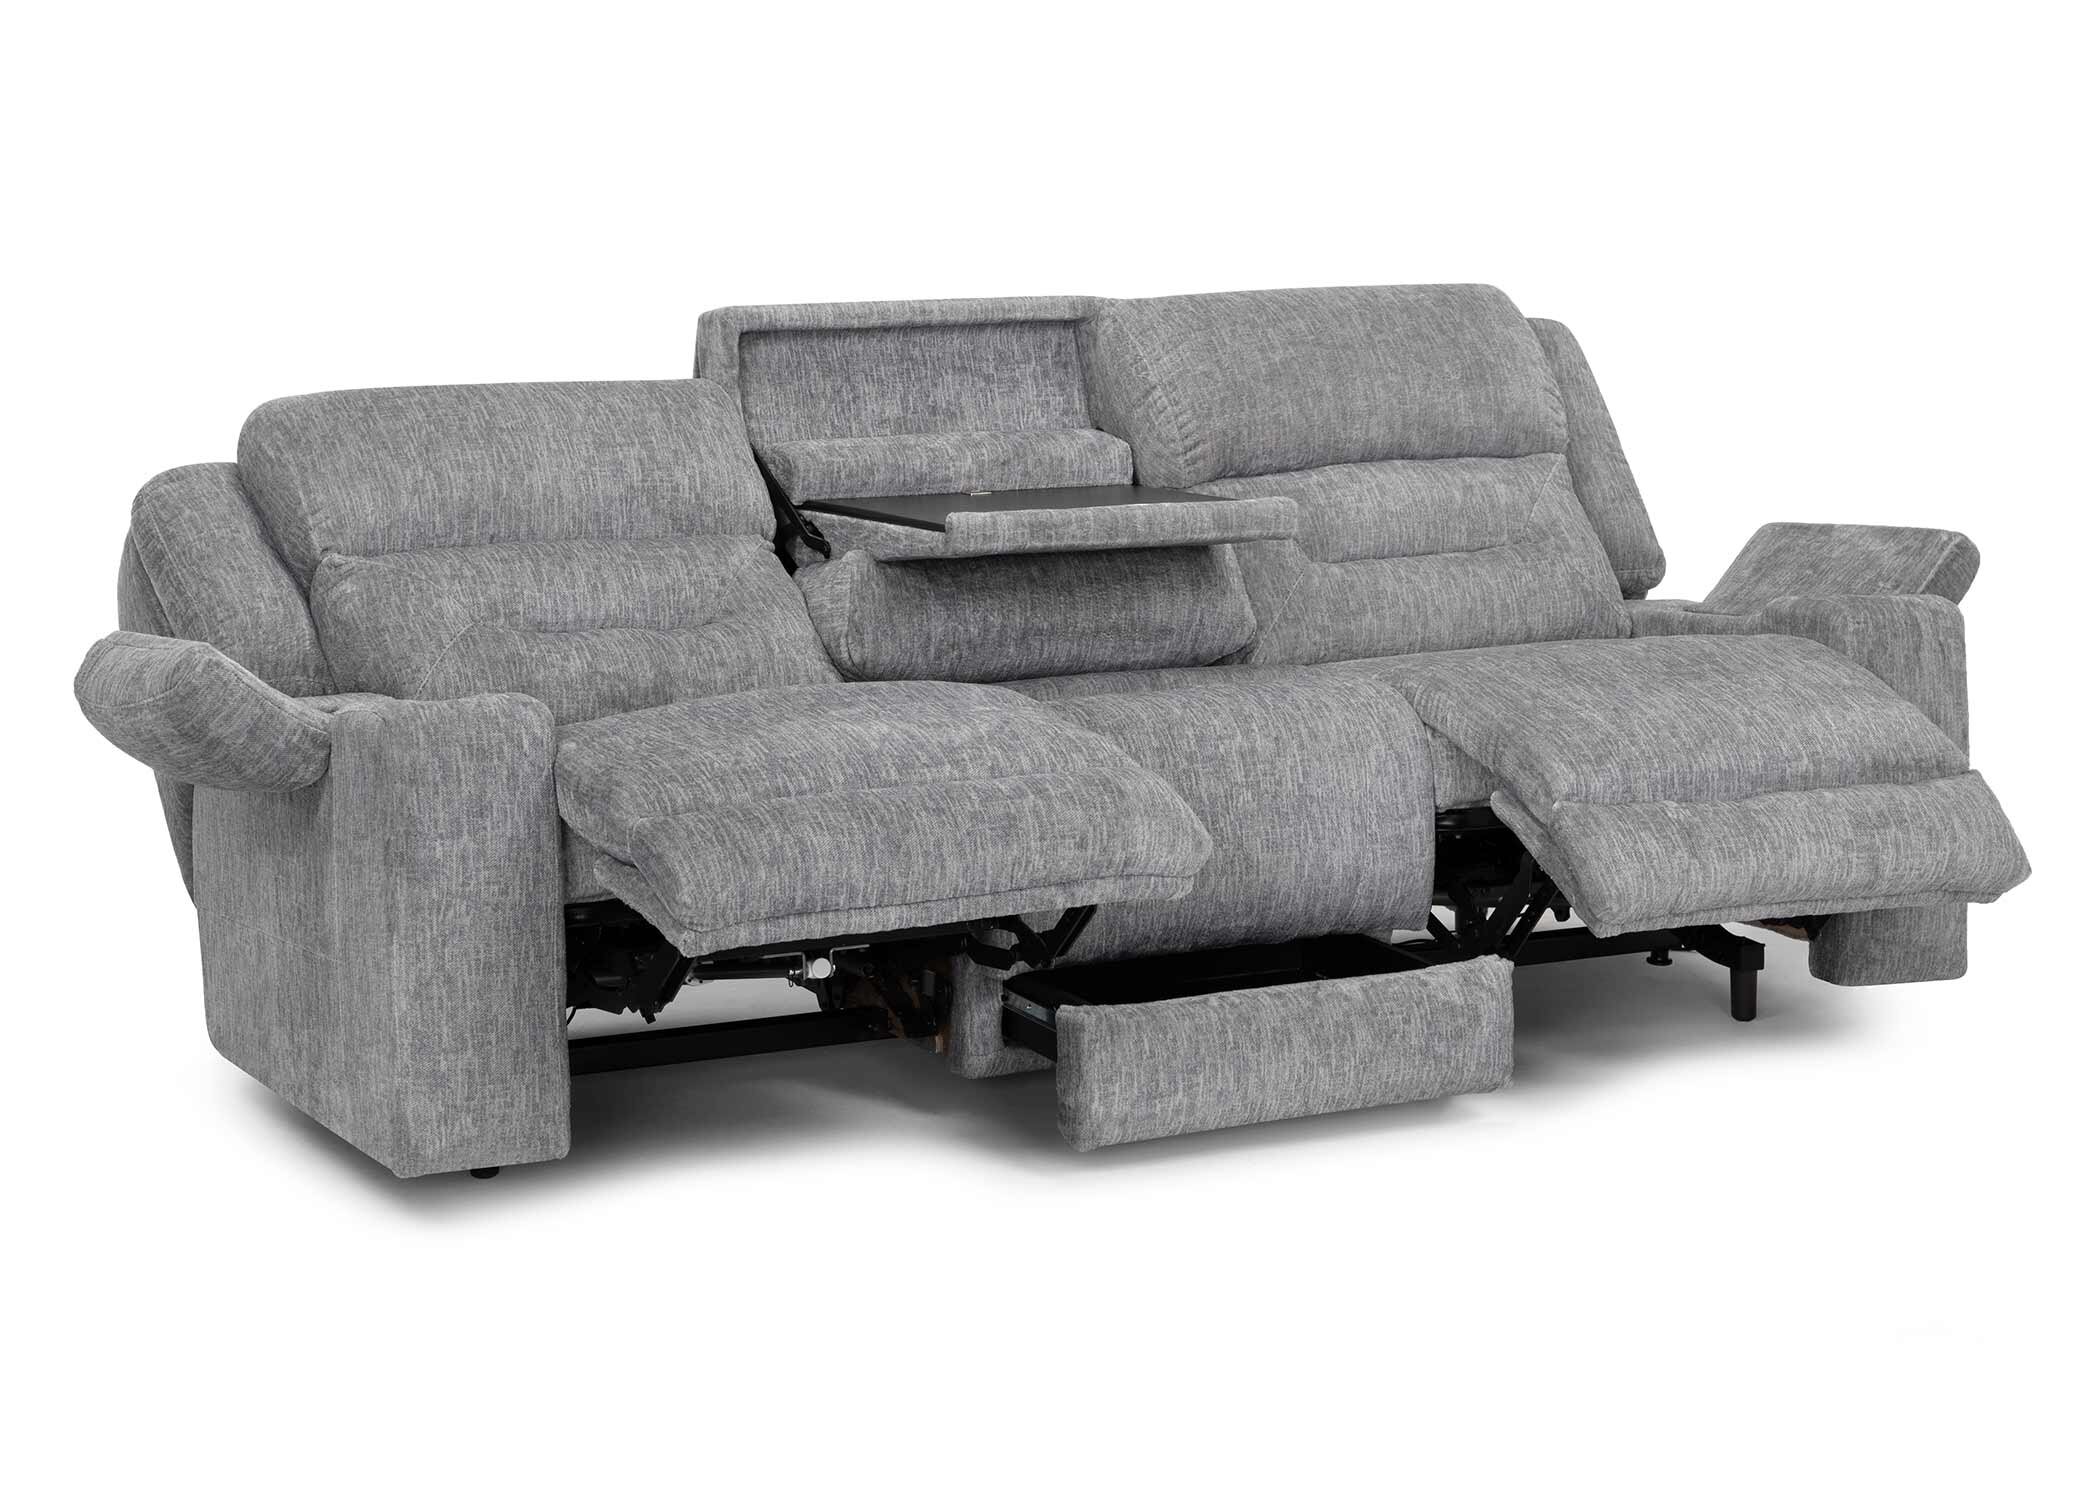  65247 Ace Reclining Sofa in 1015-06 Plush Gray - Angled/Open 